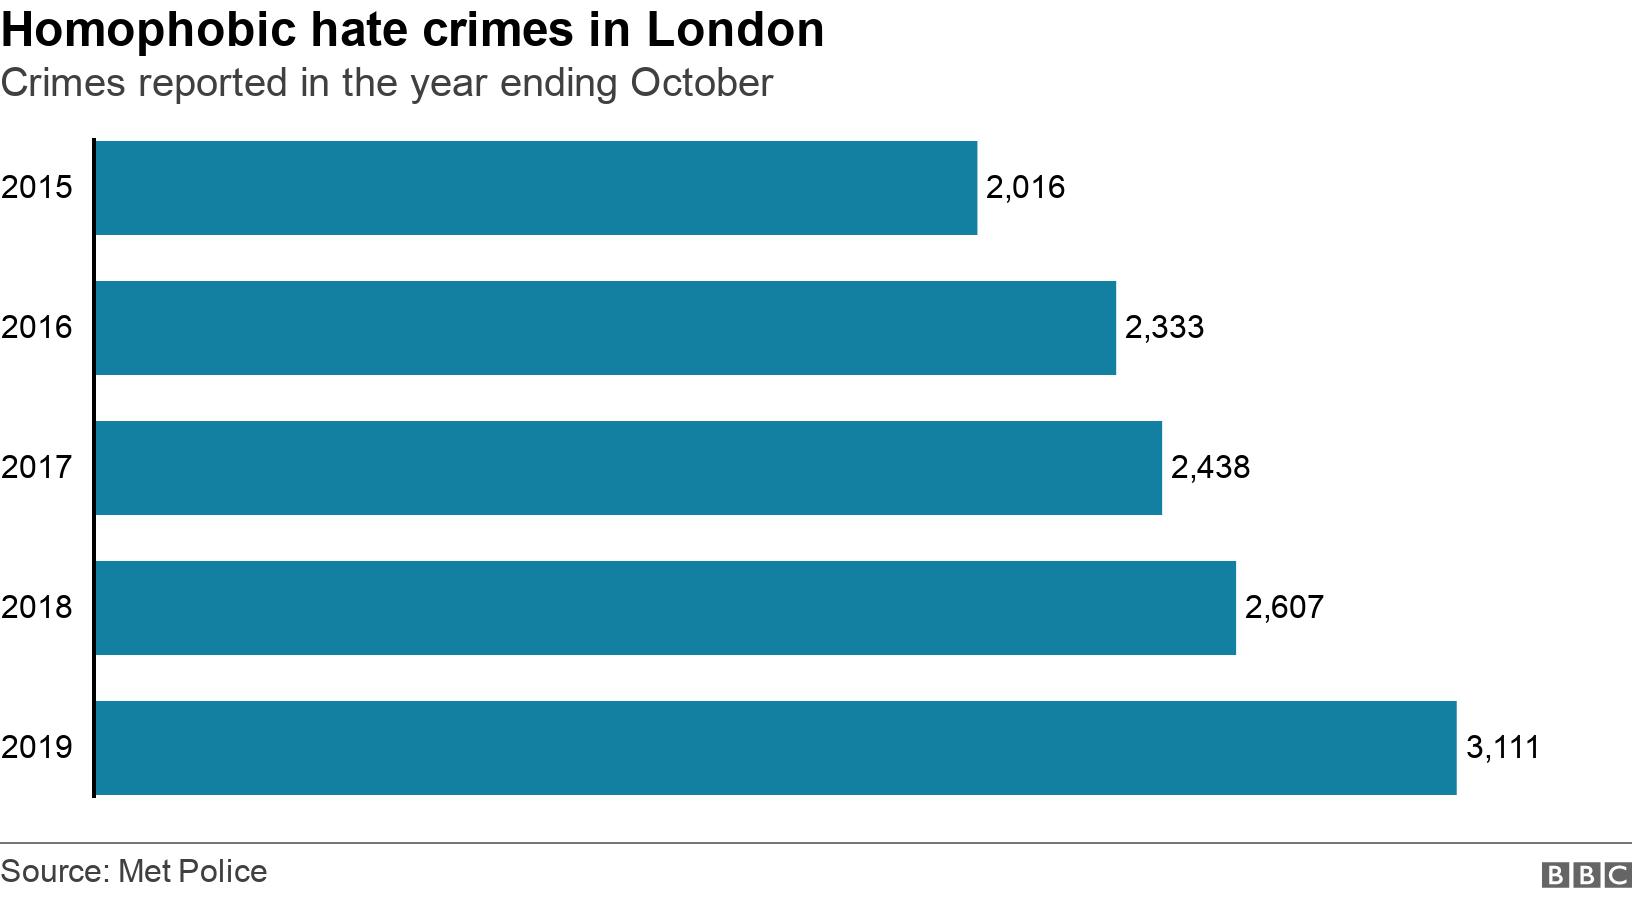 Homophobic hate crimes in London. Crimes reported in the year ending October. Latest figures show there were 3,111 hate crimes based on sexual orientation in the last 12 months. In 2017/18 it was 2607, in 2016/17 it was 2438 in 2015/16 it was 2333 and in 2014/15 it was 2016 .